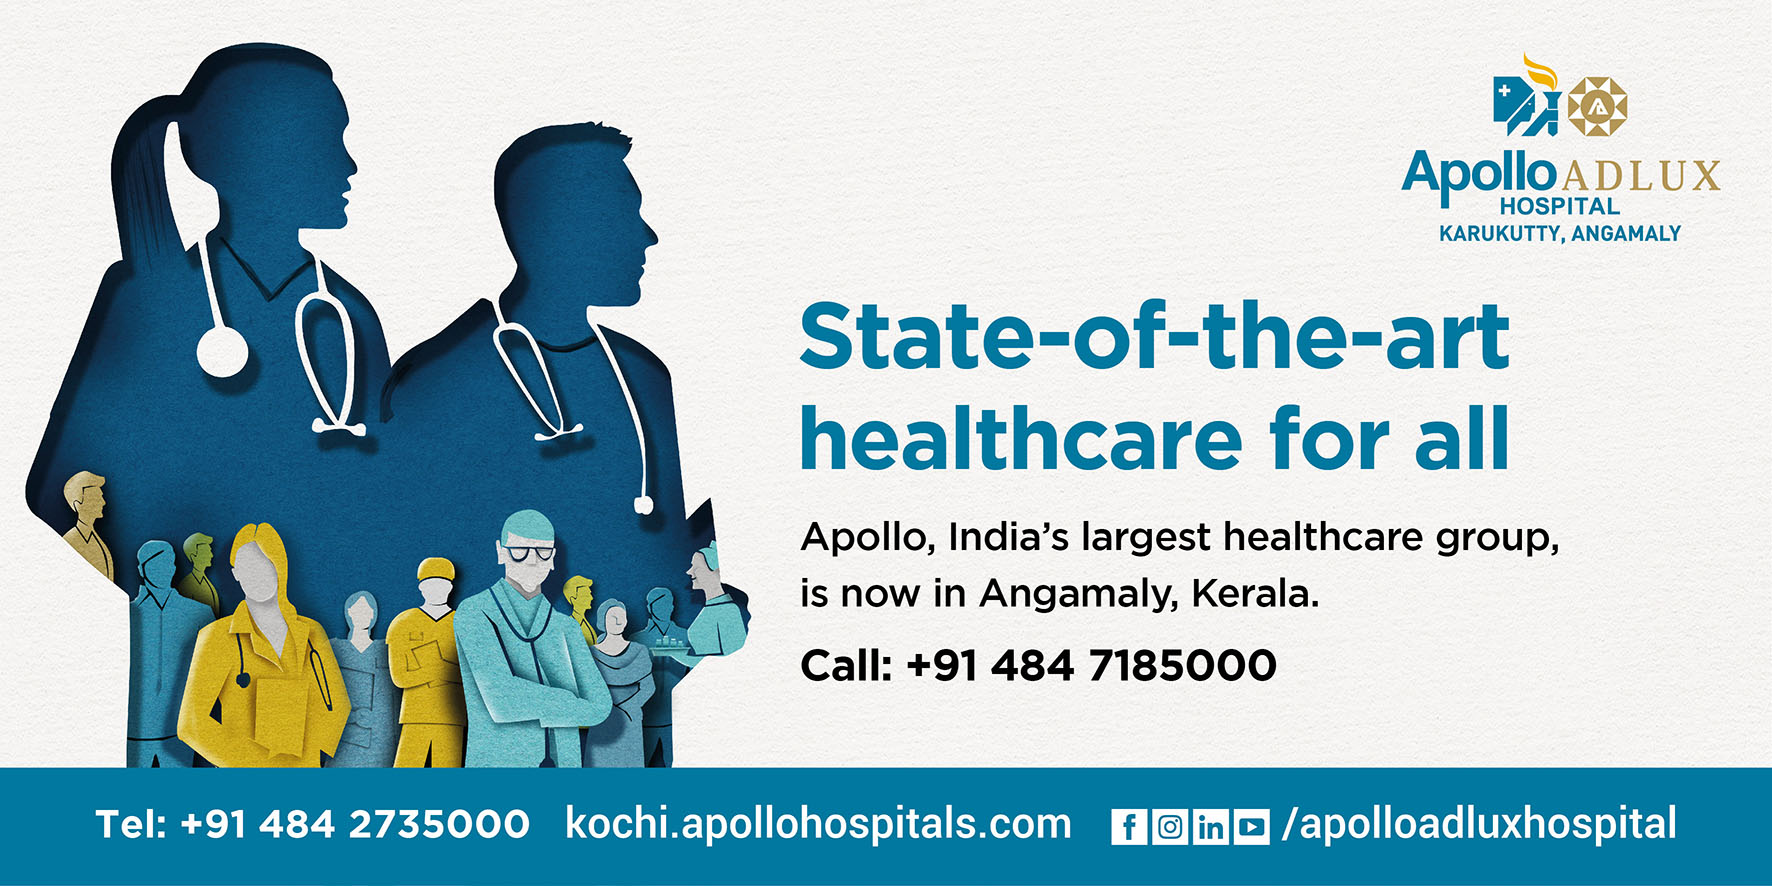 Apollo Adlux Hospital - State of the Art healthcare for all